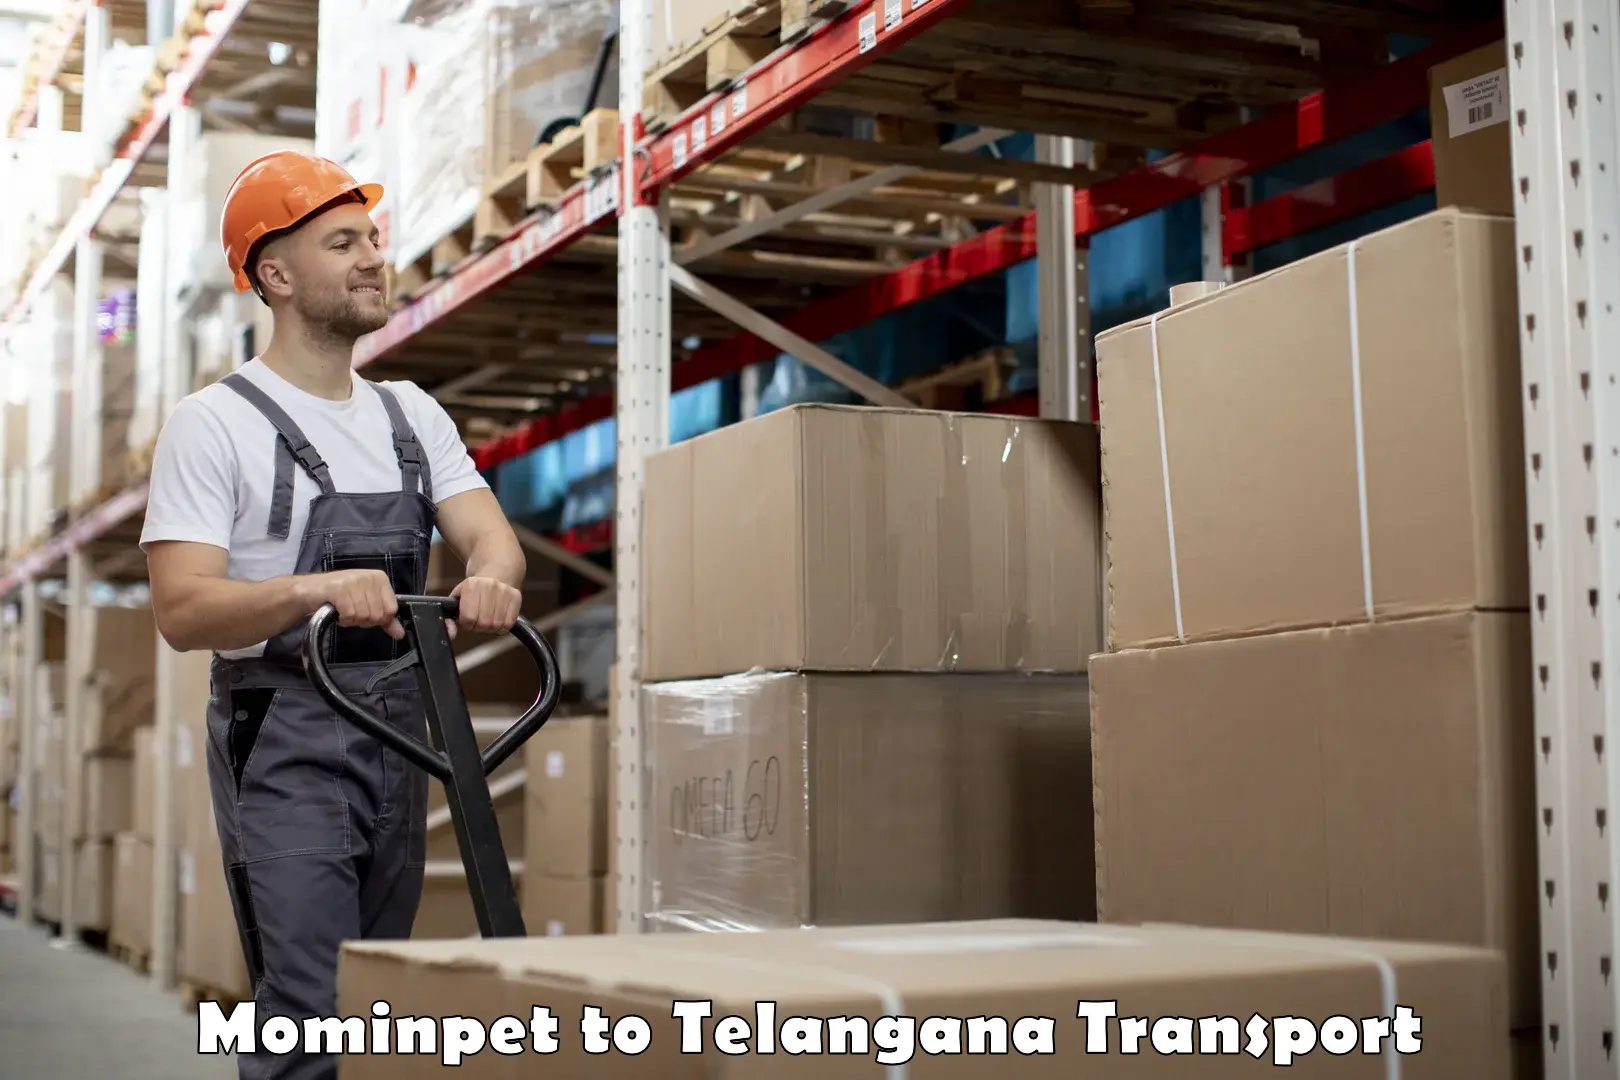 Truck transport companies in India Mominpet to Rangareddy